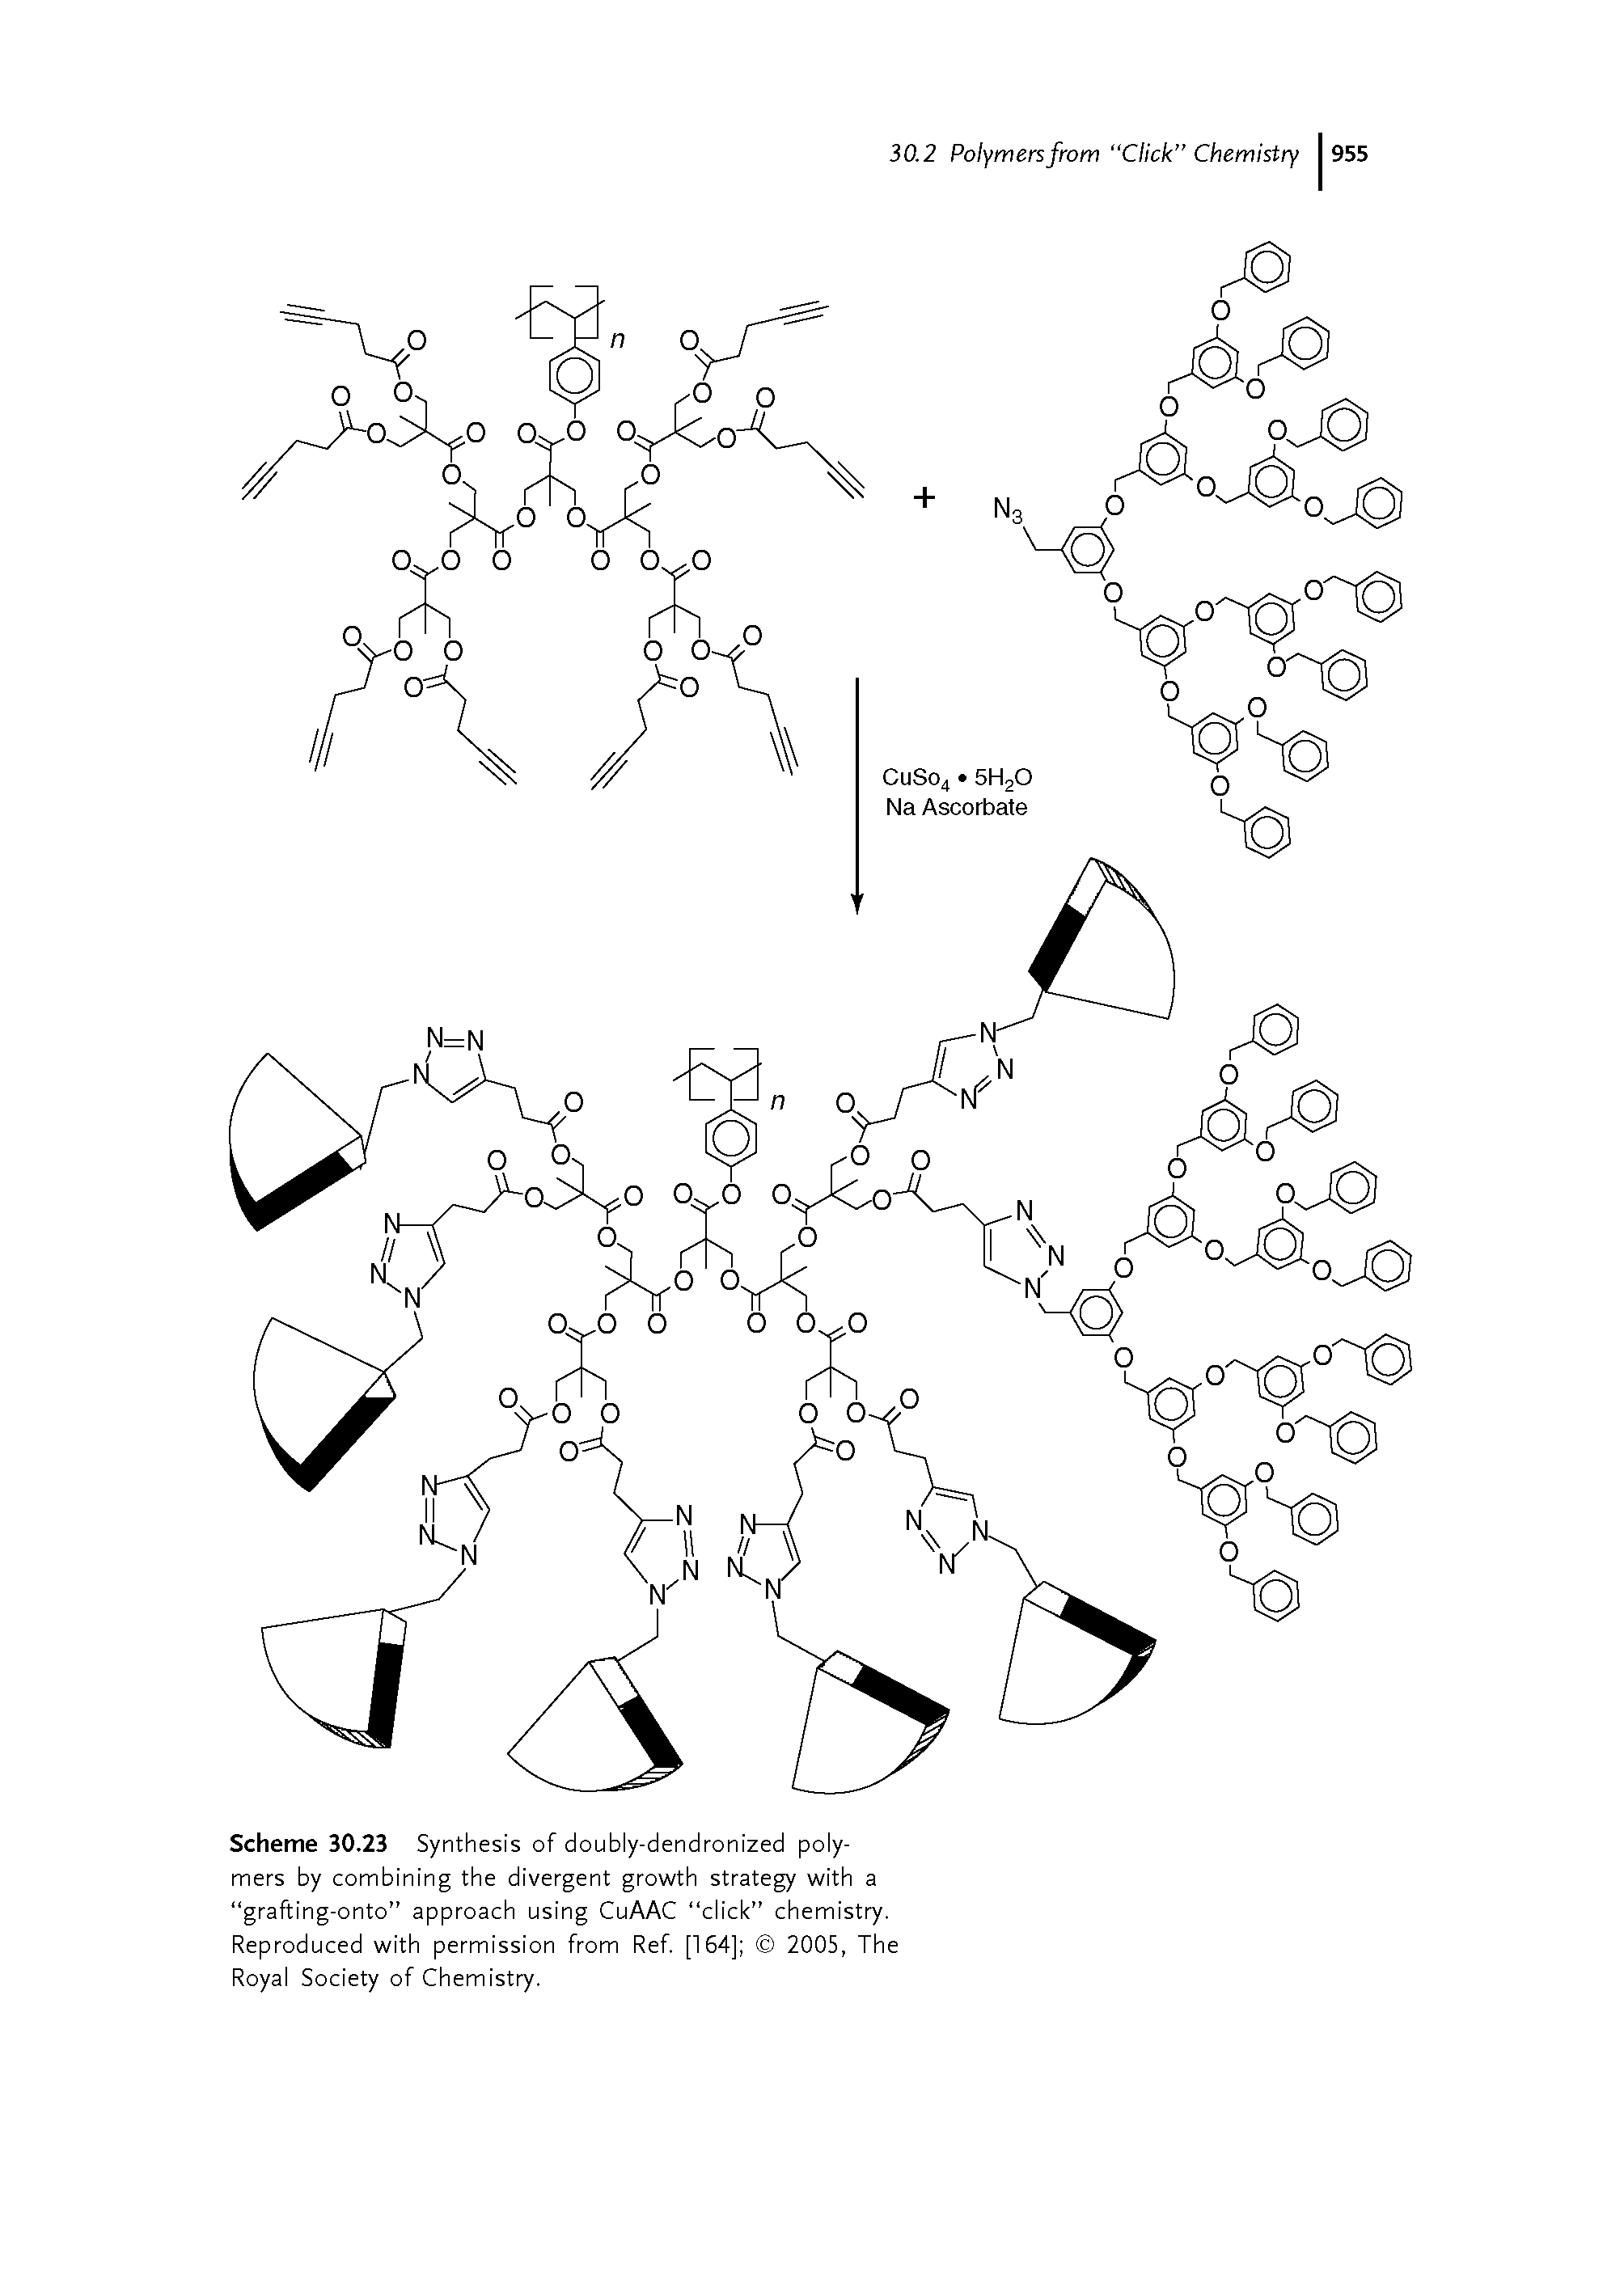 Scheme 30.23 Synthesis of doubly-dendronized polymers by combining the divergent growth strategy with a grafting-onto approach using CuAAC click chemistry. Reproduced with permission from Ref. [164] 2005, The Royal Society of Chemistry.